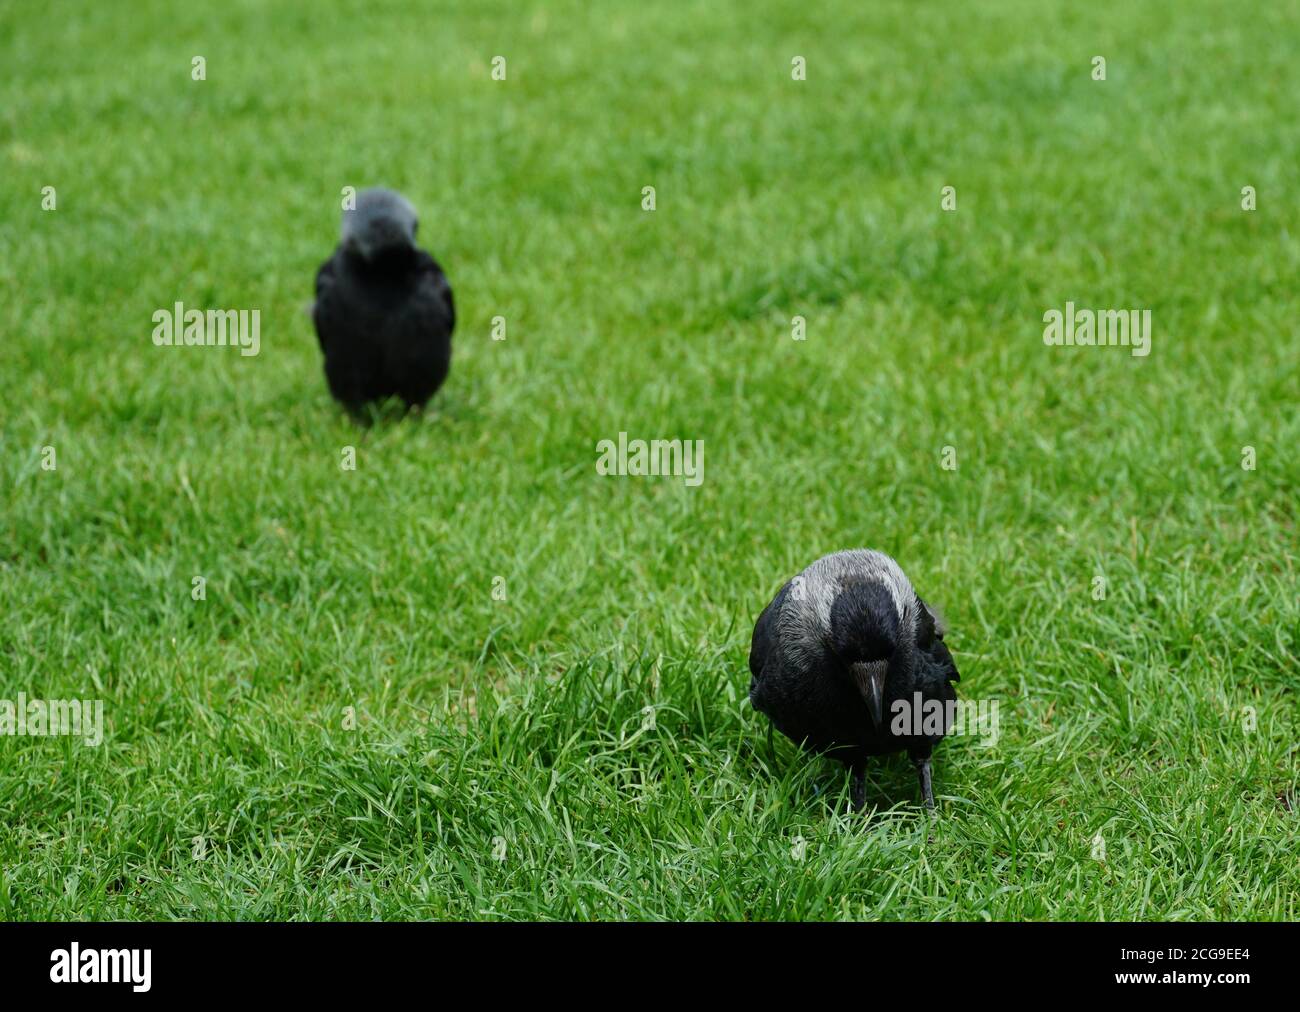 A very young raven, called Corvus in Latin, with  plumage of several grey shades standing on a bright green lawn. Stock Photo